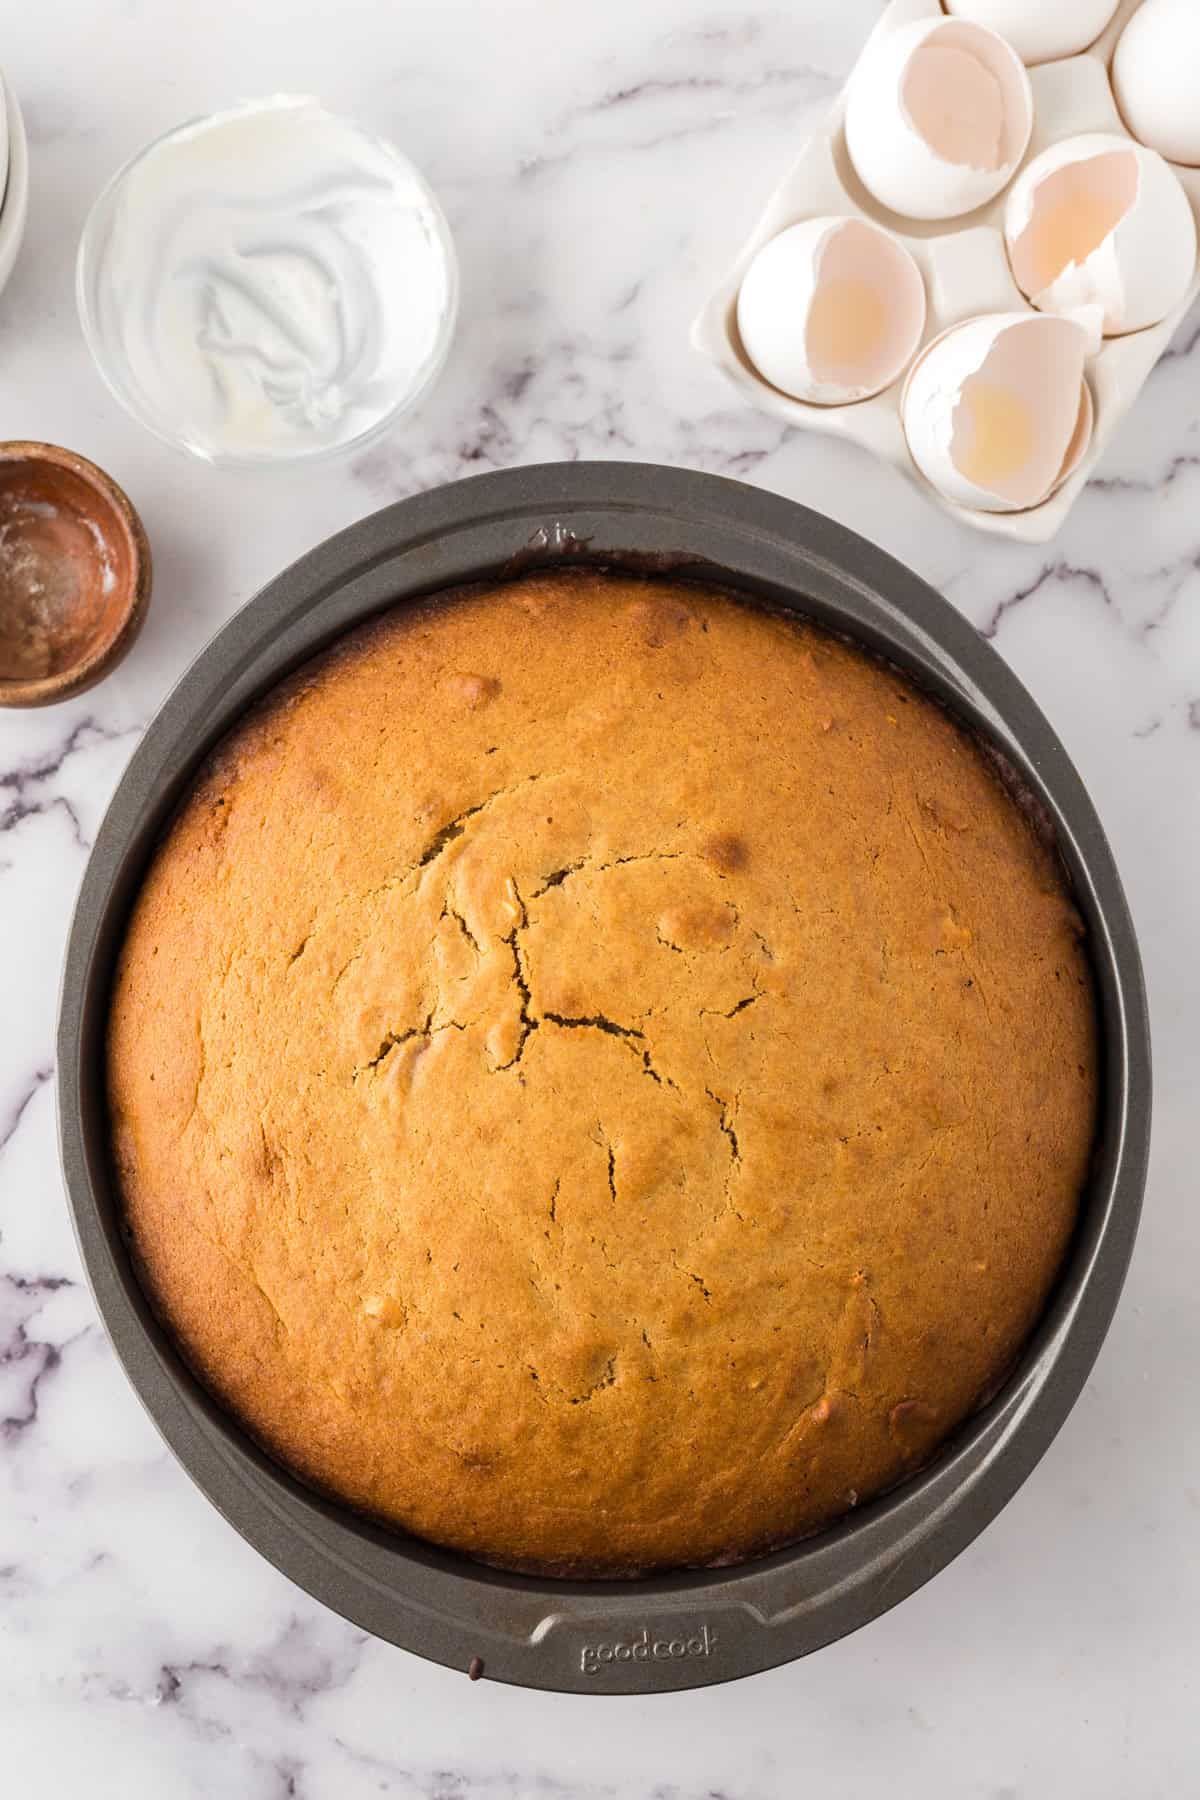 round cake pan with the whole baked fresh from the oven whole wheat honey cake.